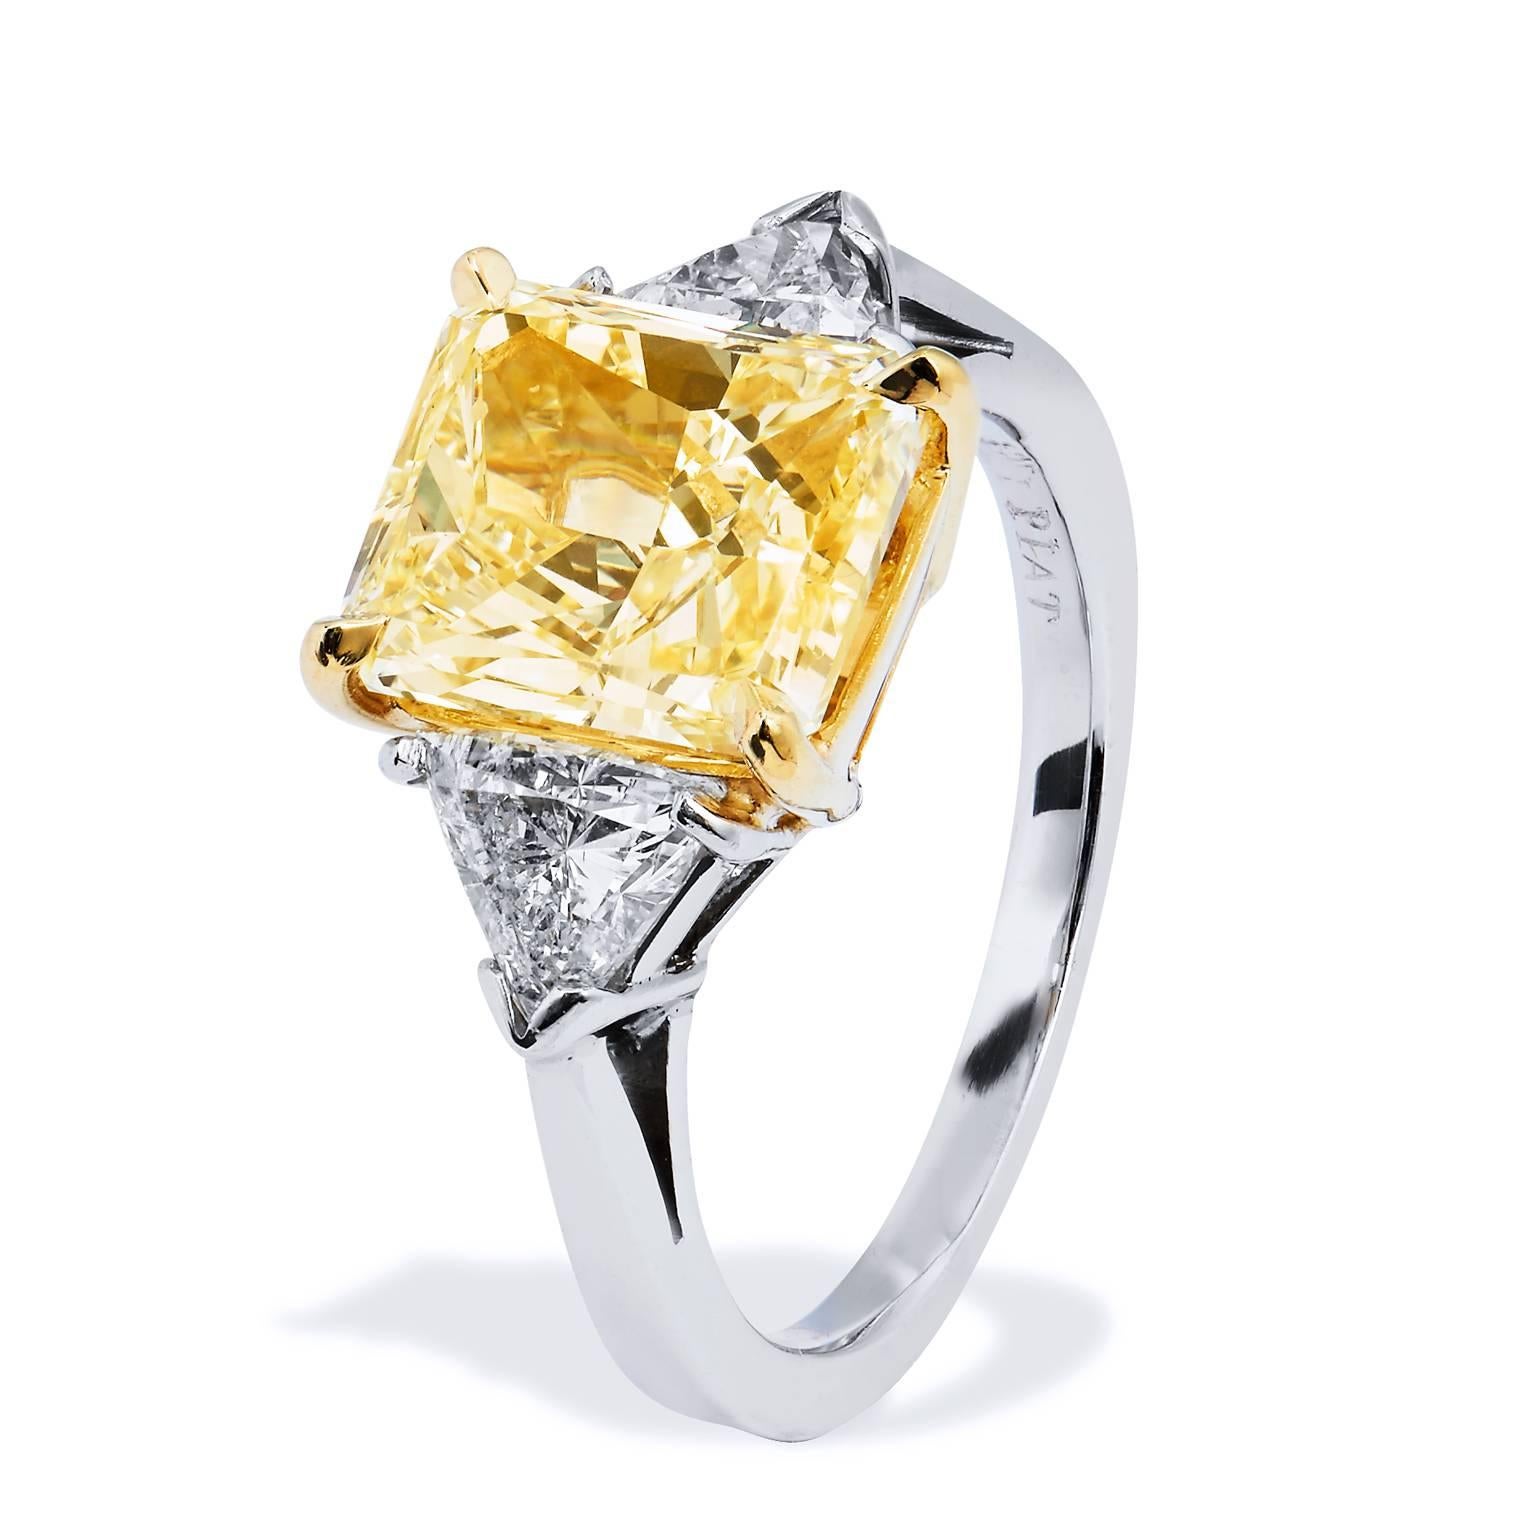 An engagement ring that will set her heart ablaze. An extraordinary 3.60 carat fancy yellow diamond set at center in 18 karat yellow gold from bridge to gallery, smolders with a bold, rich glow (W/S2; GIA #2101082871).  Two pieces of trillion cut